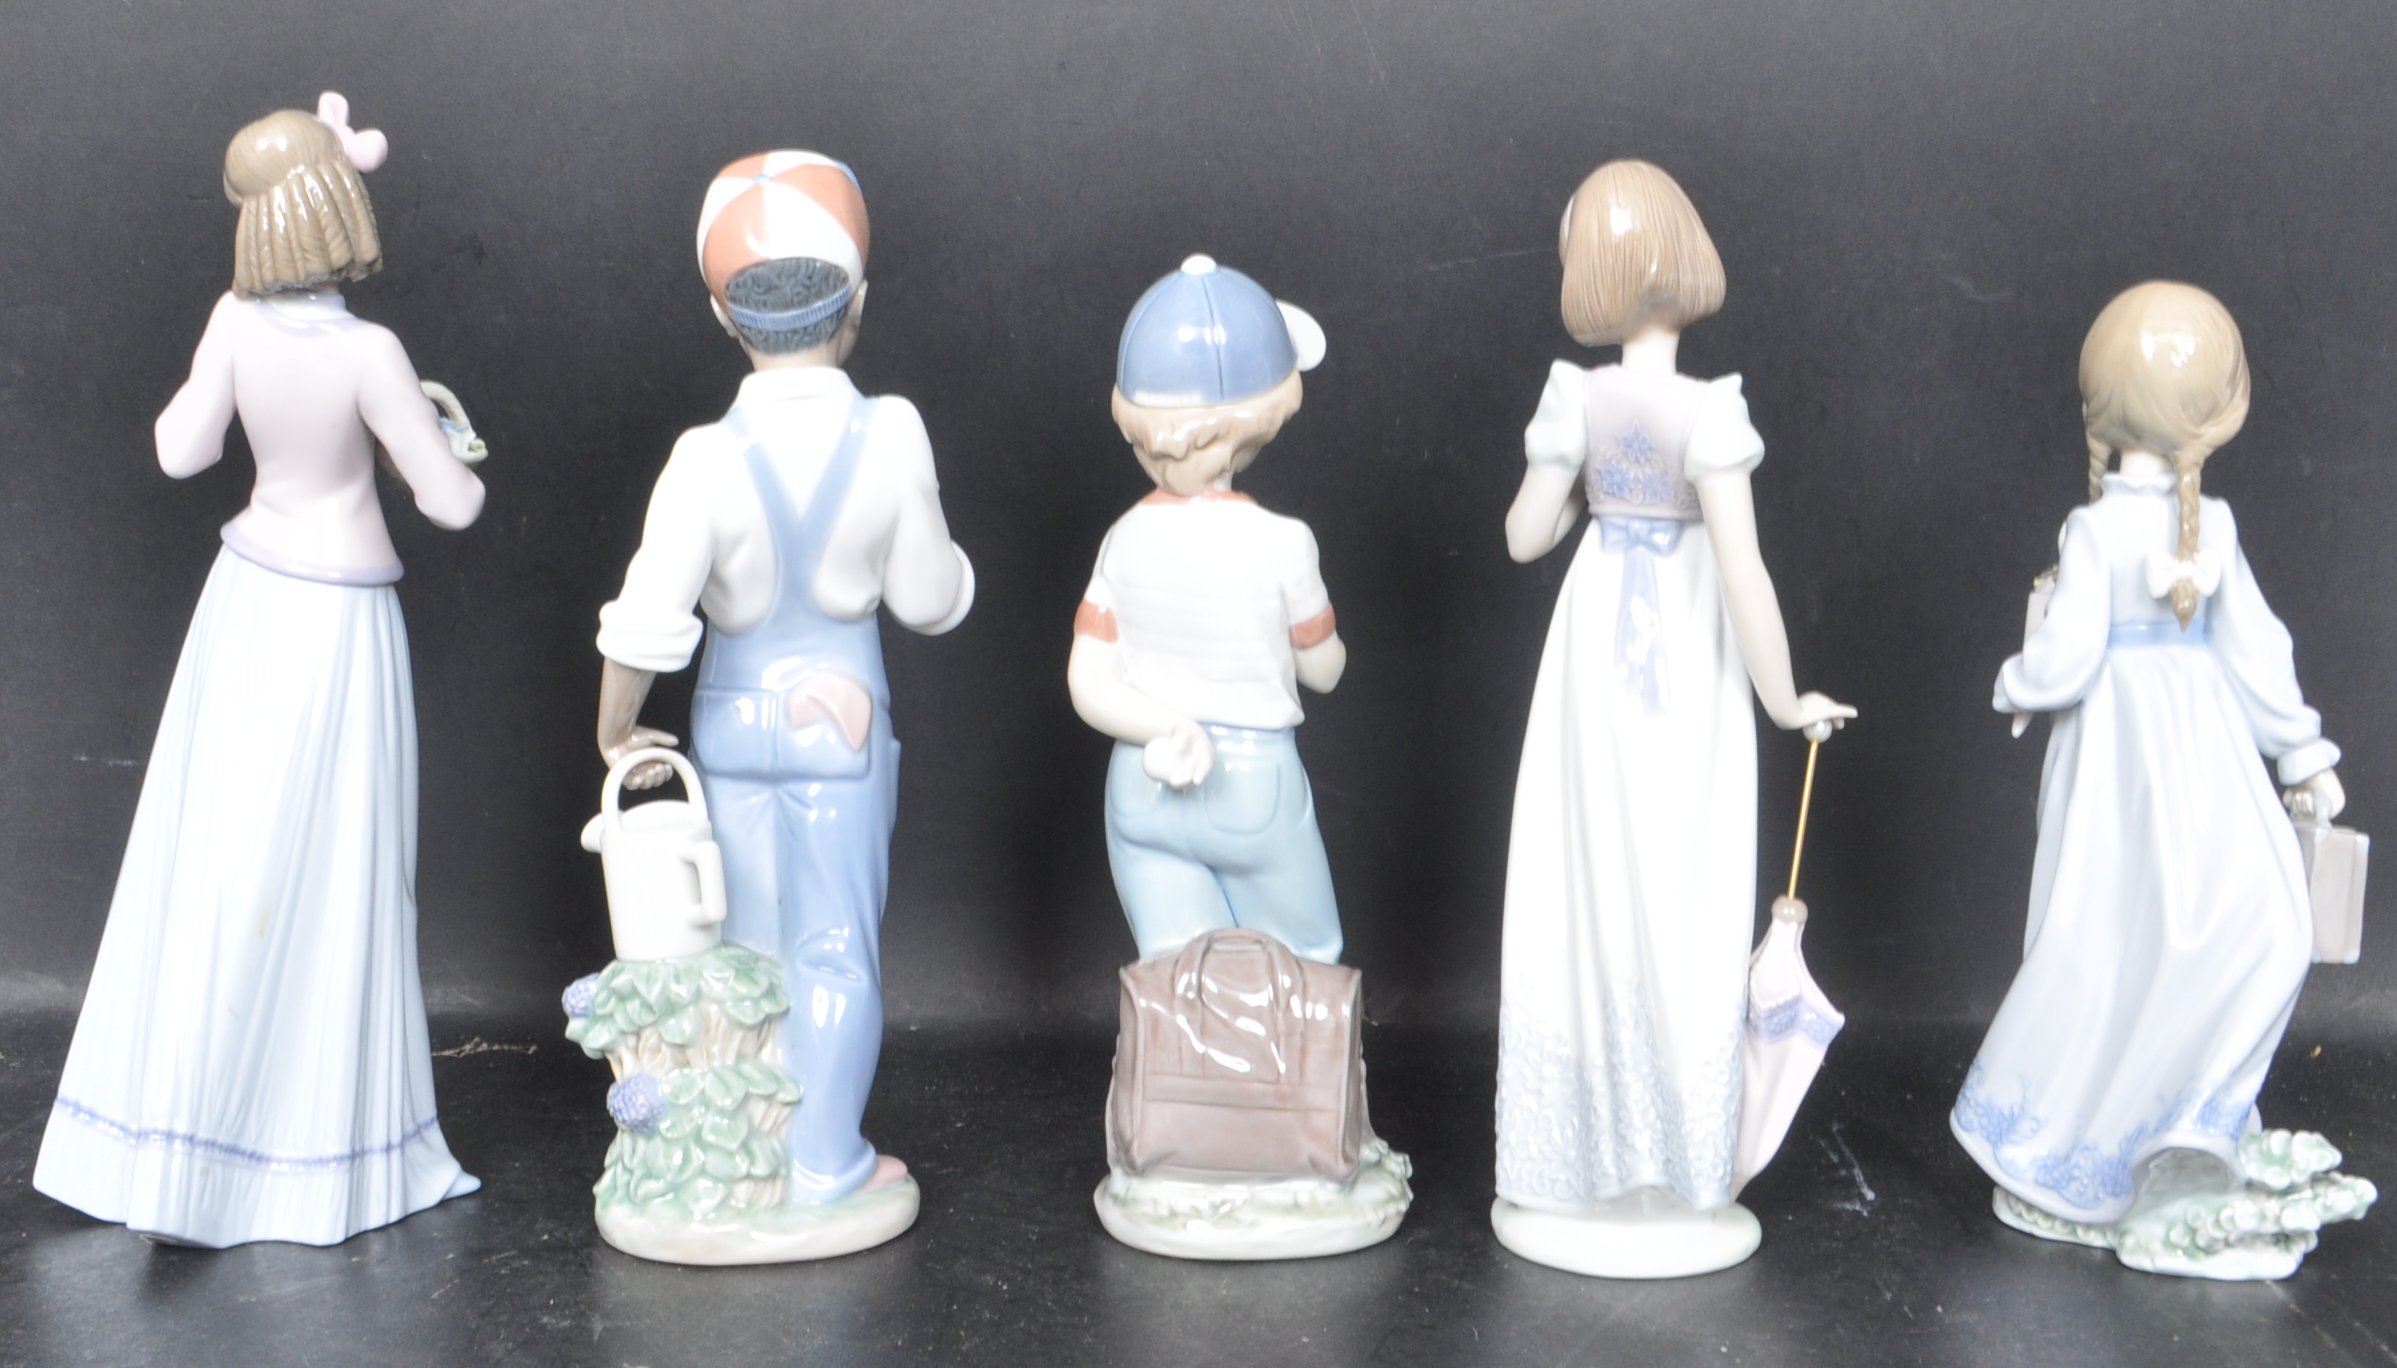 COLLECTION OF FIVE SPANISH LLADRO CERAMIC PORCELAIN FIGURINES - Image 3 of 6